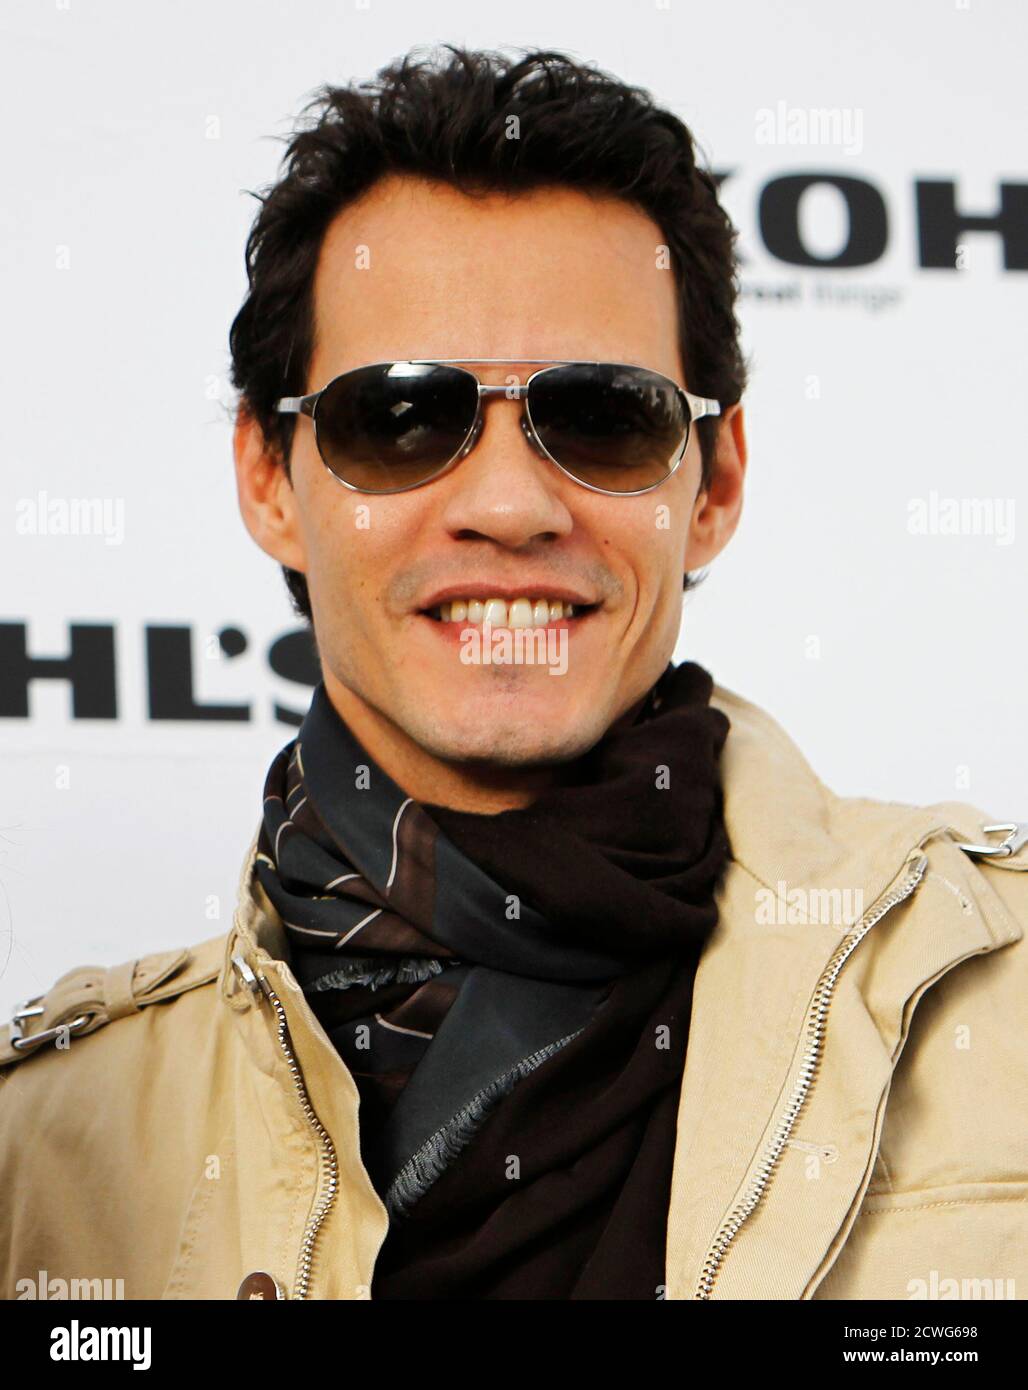 Marc Anthony poses at a news conference to announce 'The Jennifer Lopez and Marc Anthony' collections in partnership with Kohl's department stores at The London West Hollywood hotel in West Hollywood, California, November 18, 2010. Kohl's will be the exclusive provider of the contemporary lifestyle brands in the U.S. and it will be available nationwide in Fall 2011 beginning with women's and men's apparel and accessories. REUTERS/Danny Moloshok (UNITED STATES - Tags: ENTERTAINMENT FASHION BUSINESS HEADSHOT) Stock Photo